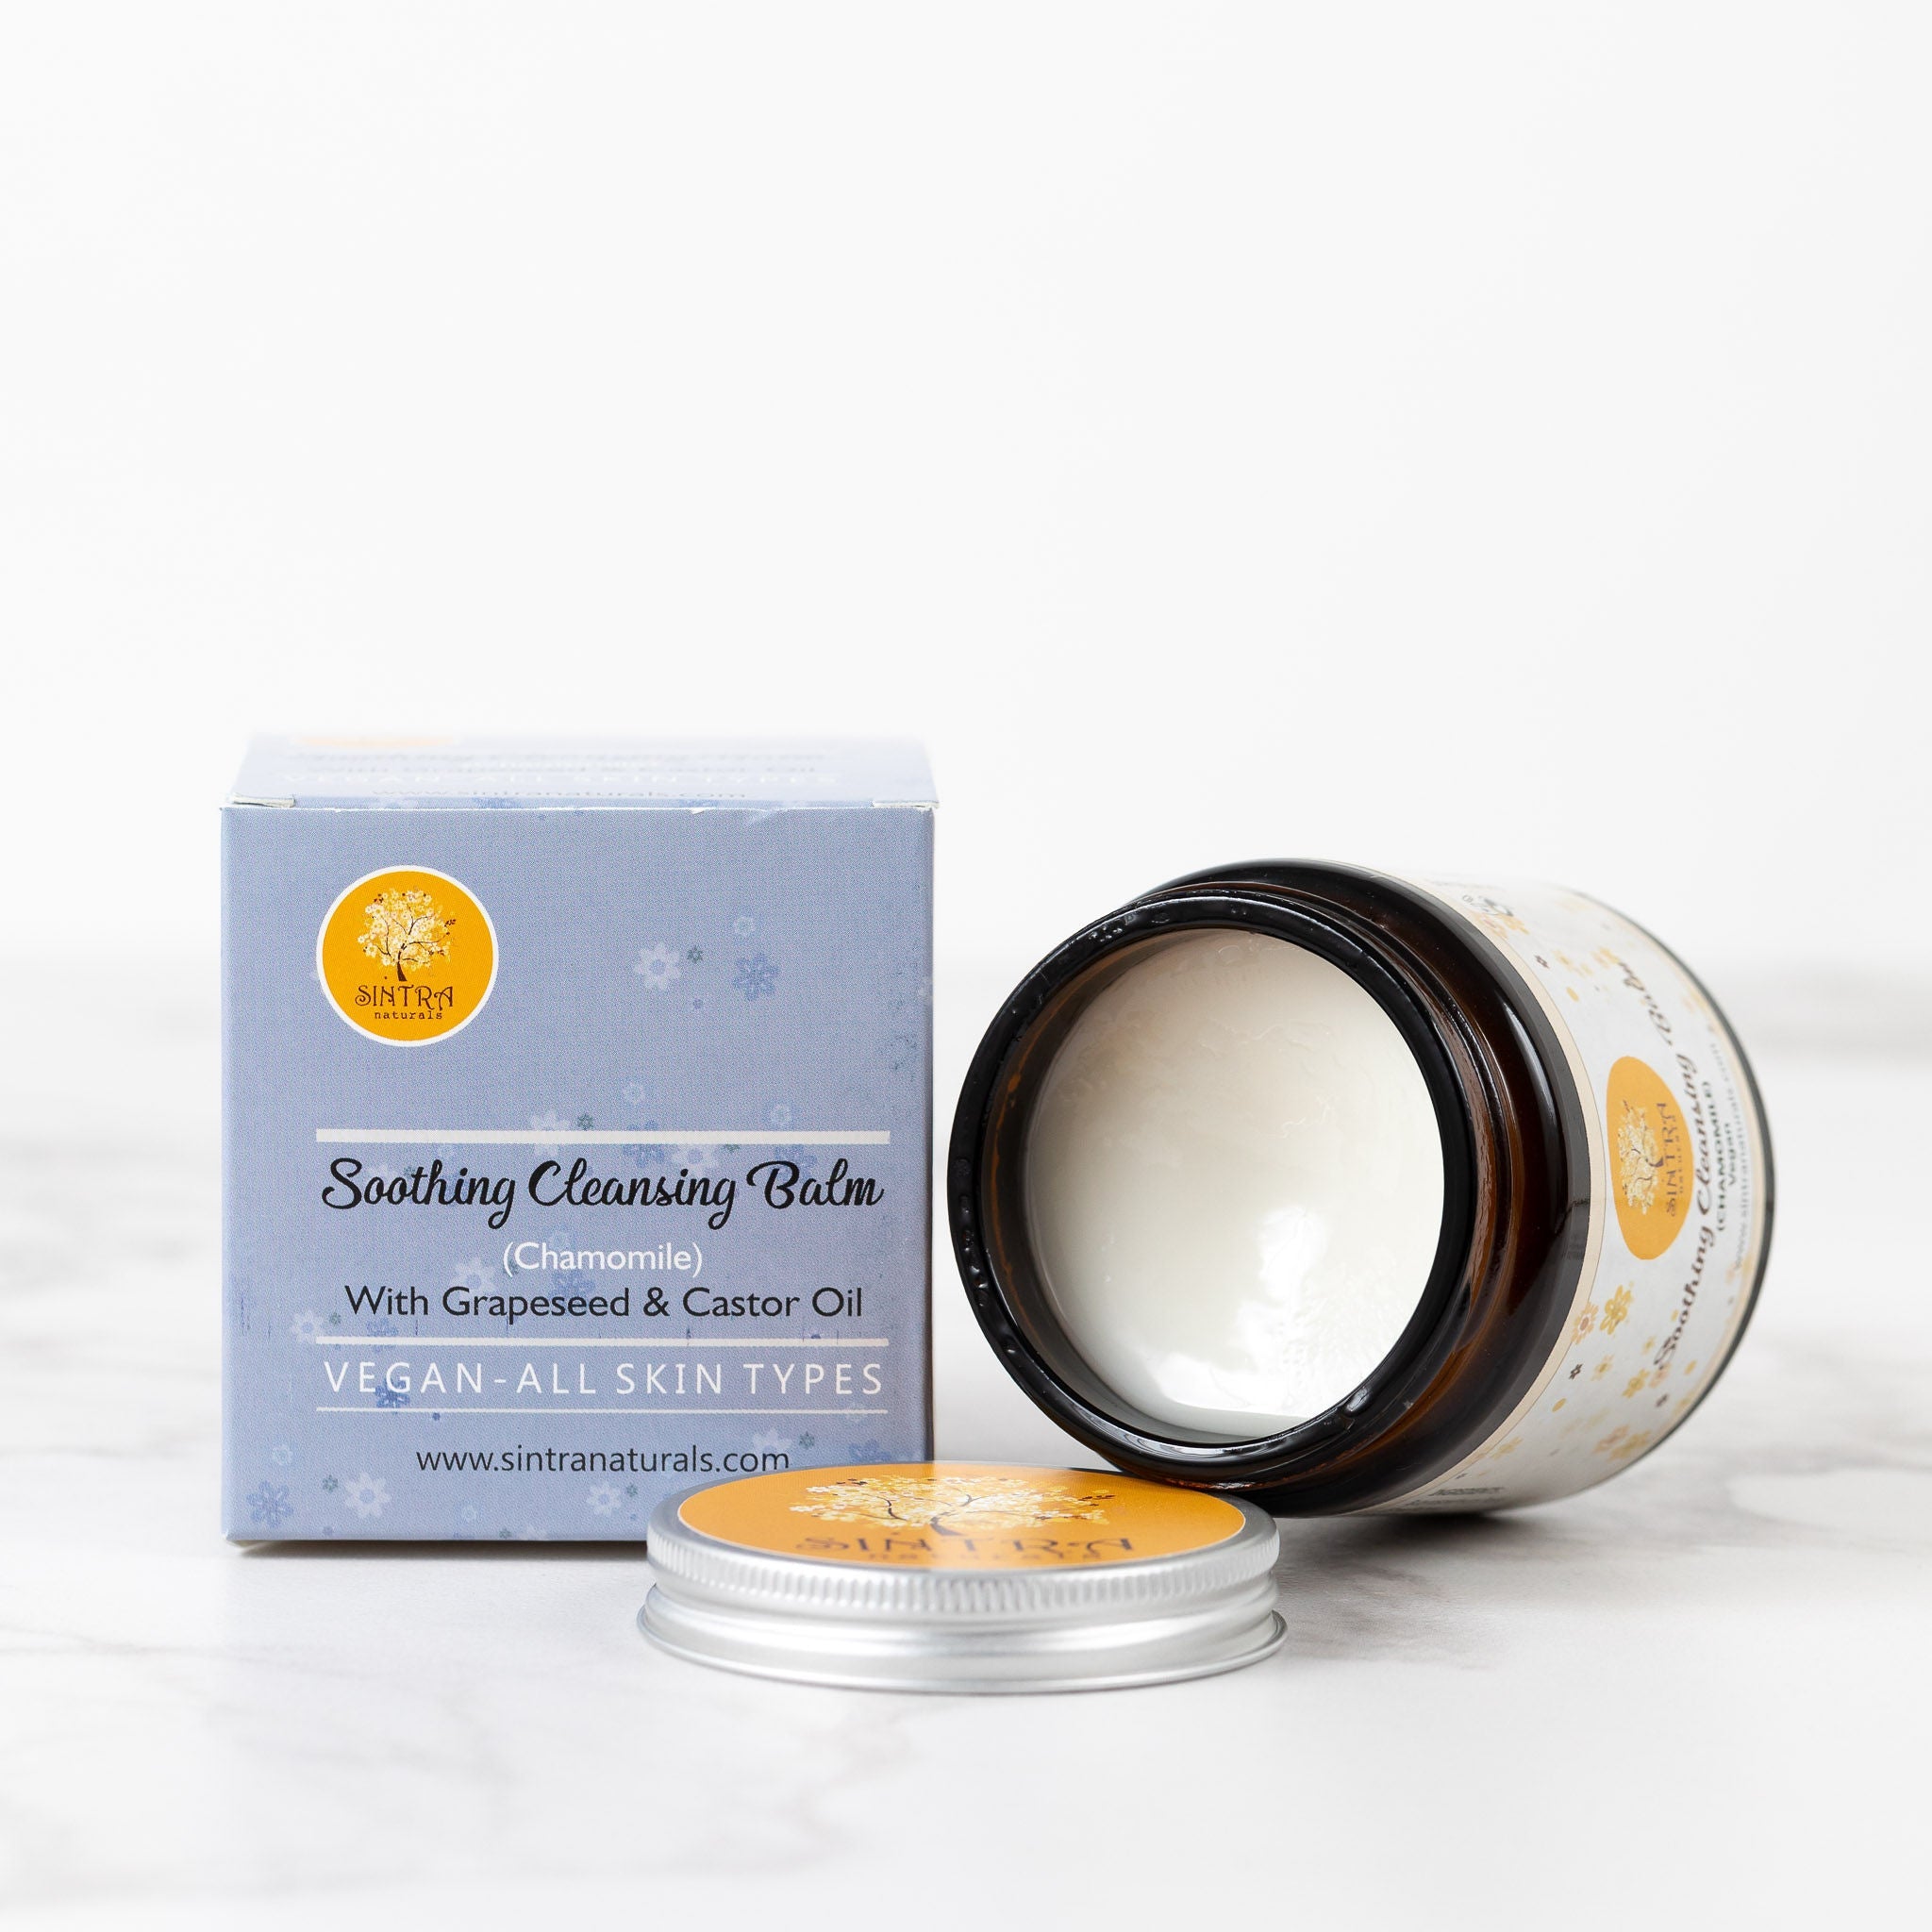 Soothing Cleansing Balm - Chamomile | Make-Up Remover